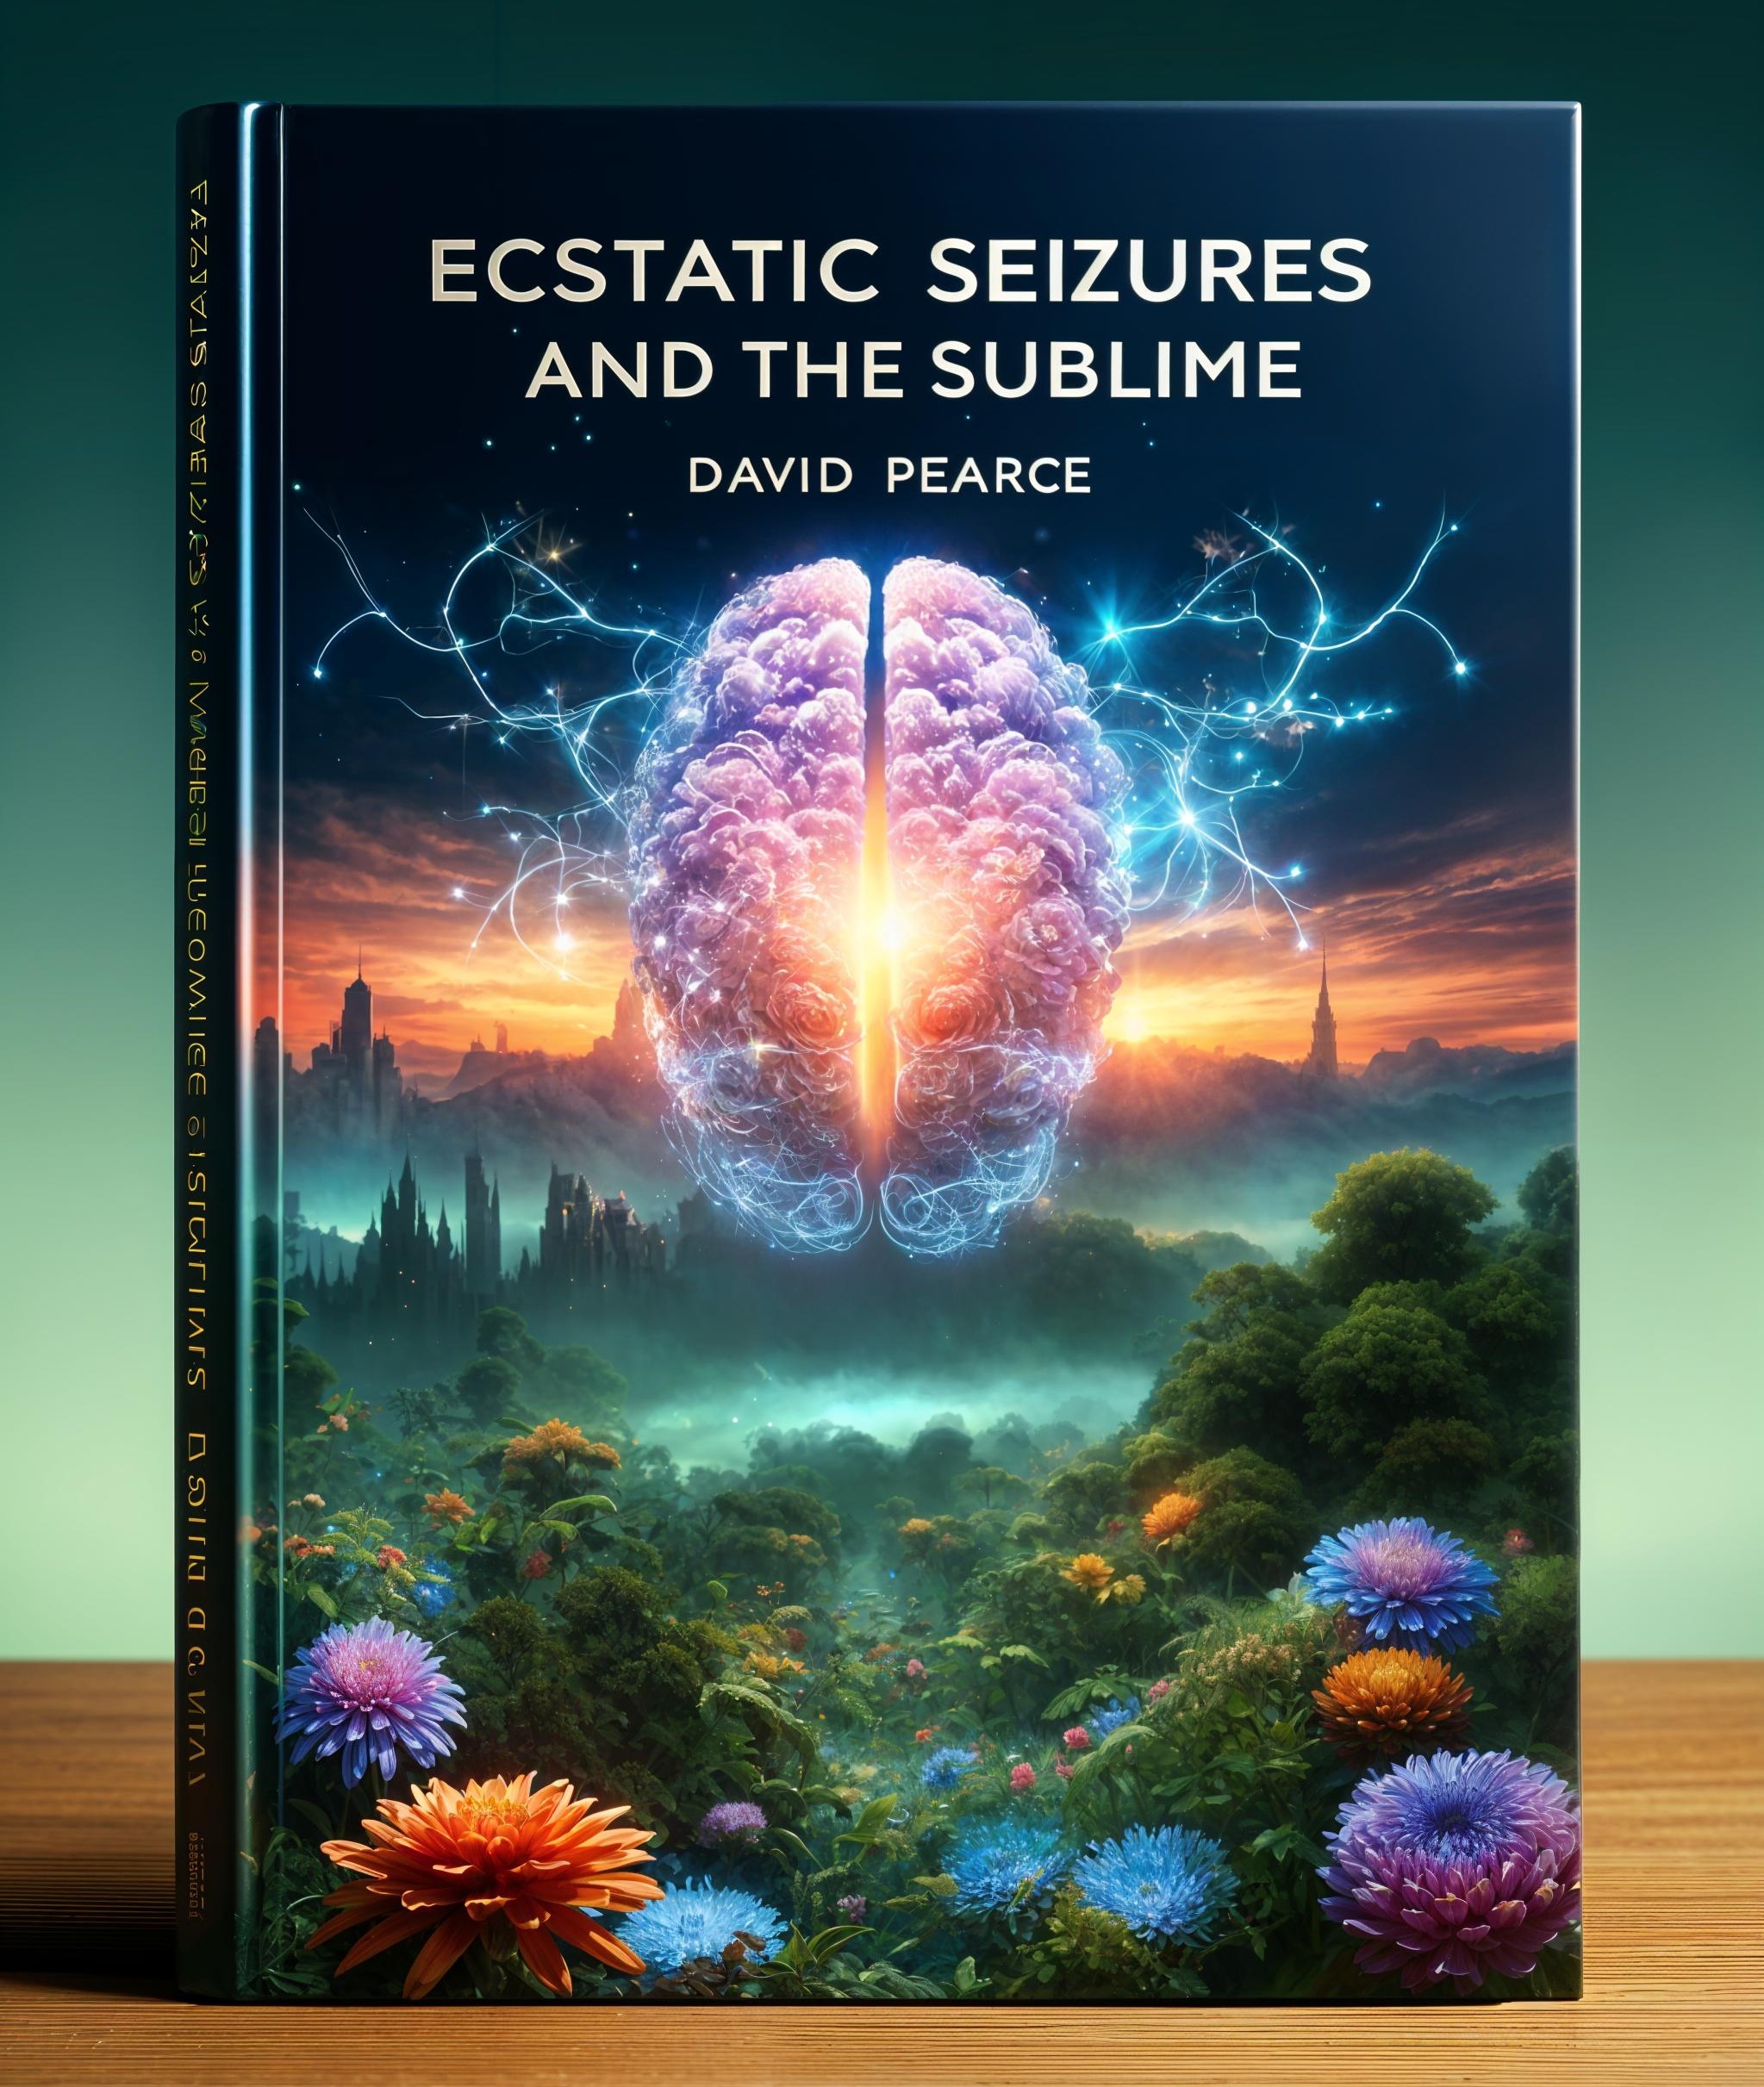 Ecstastic Seizures and the Sublime by David Pearce